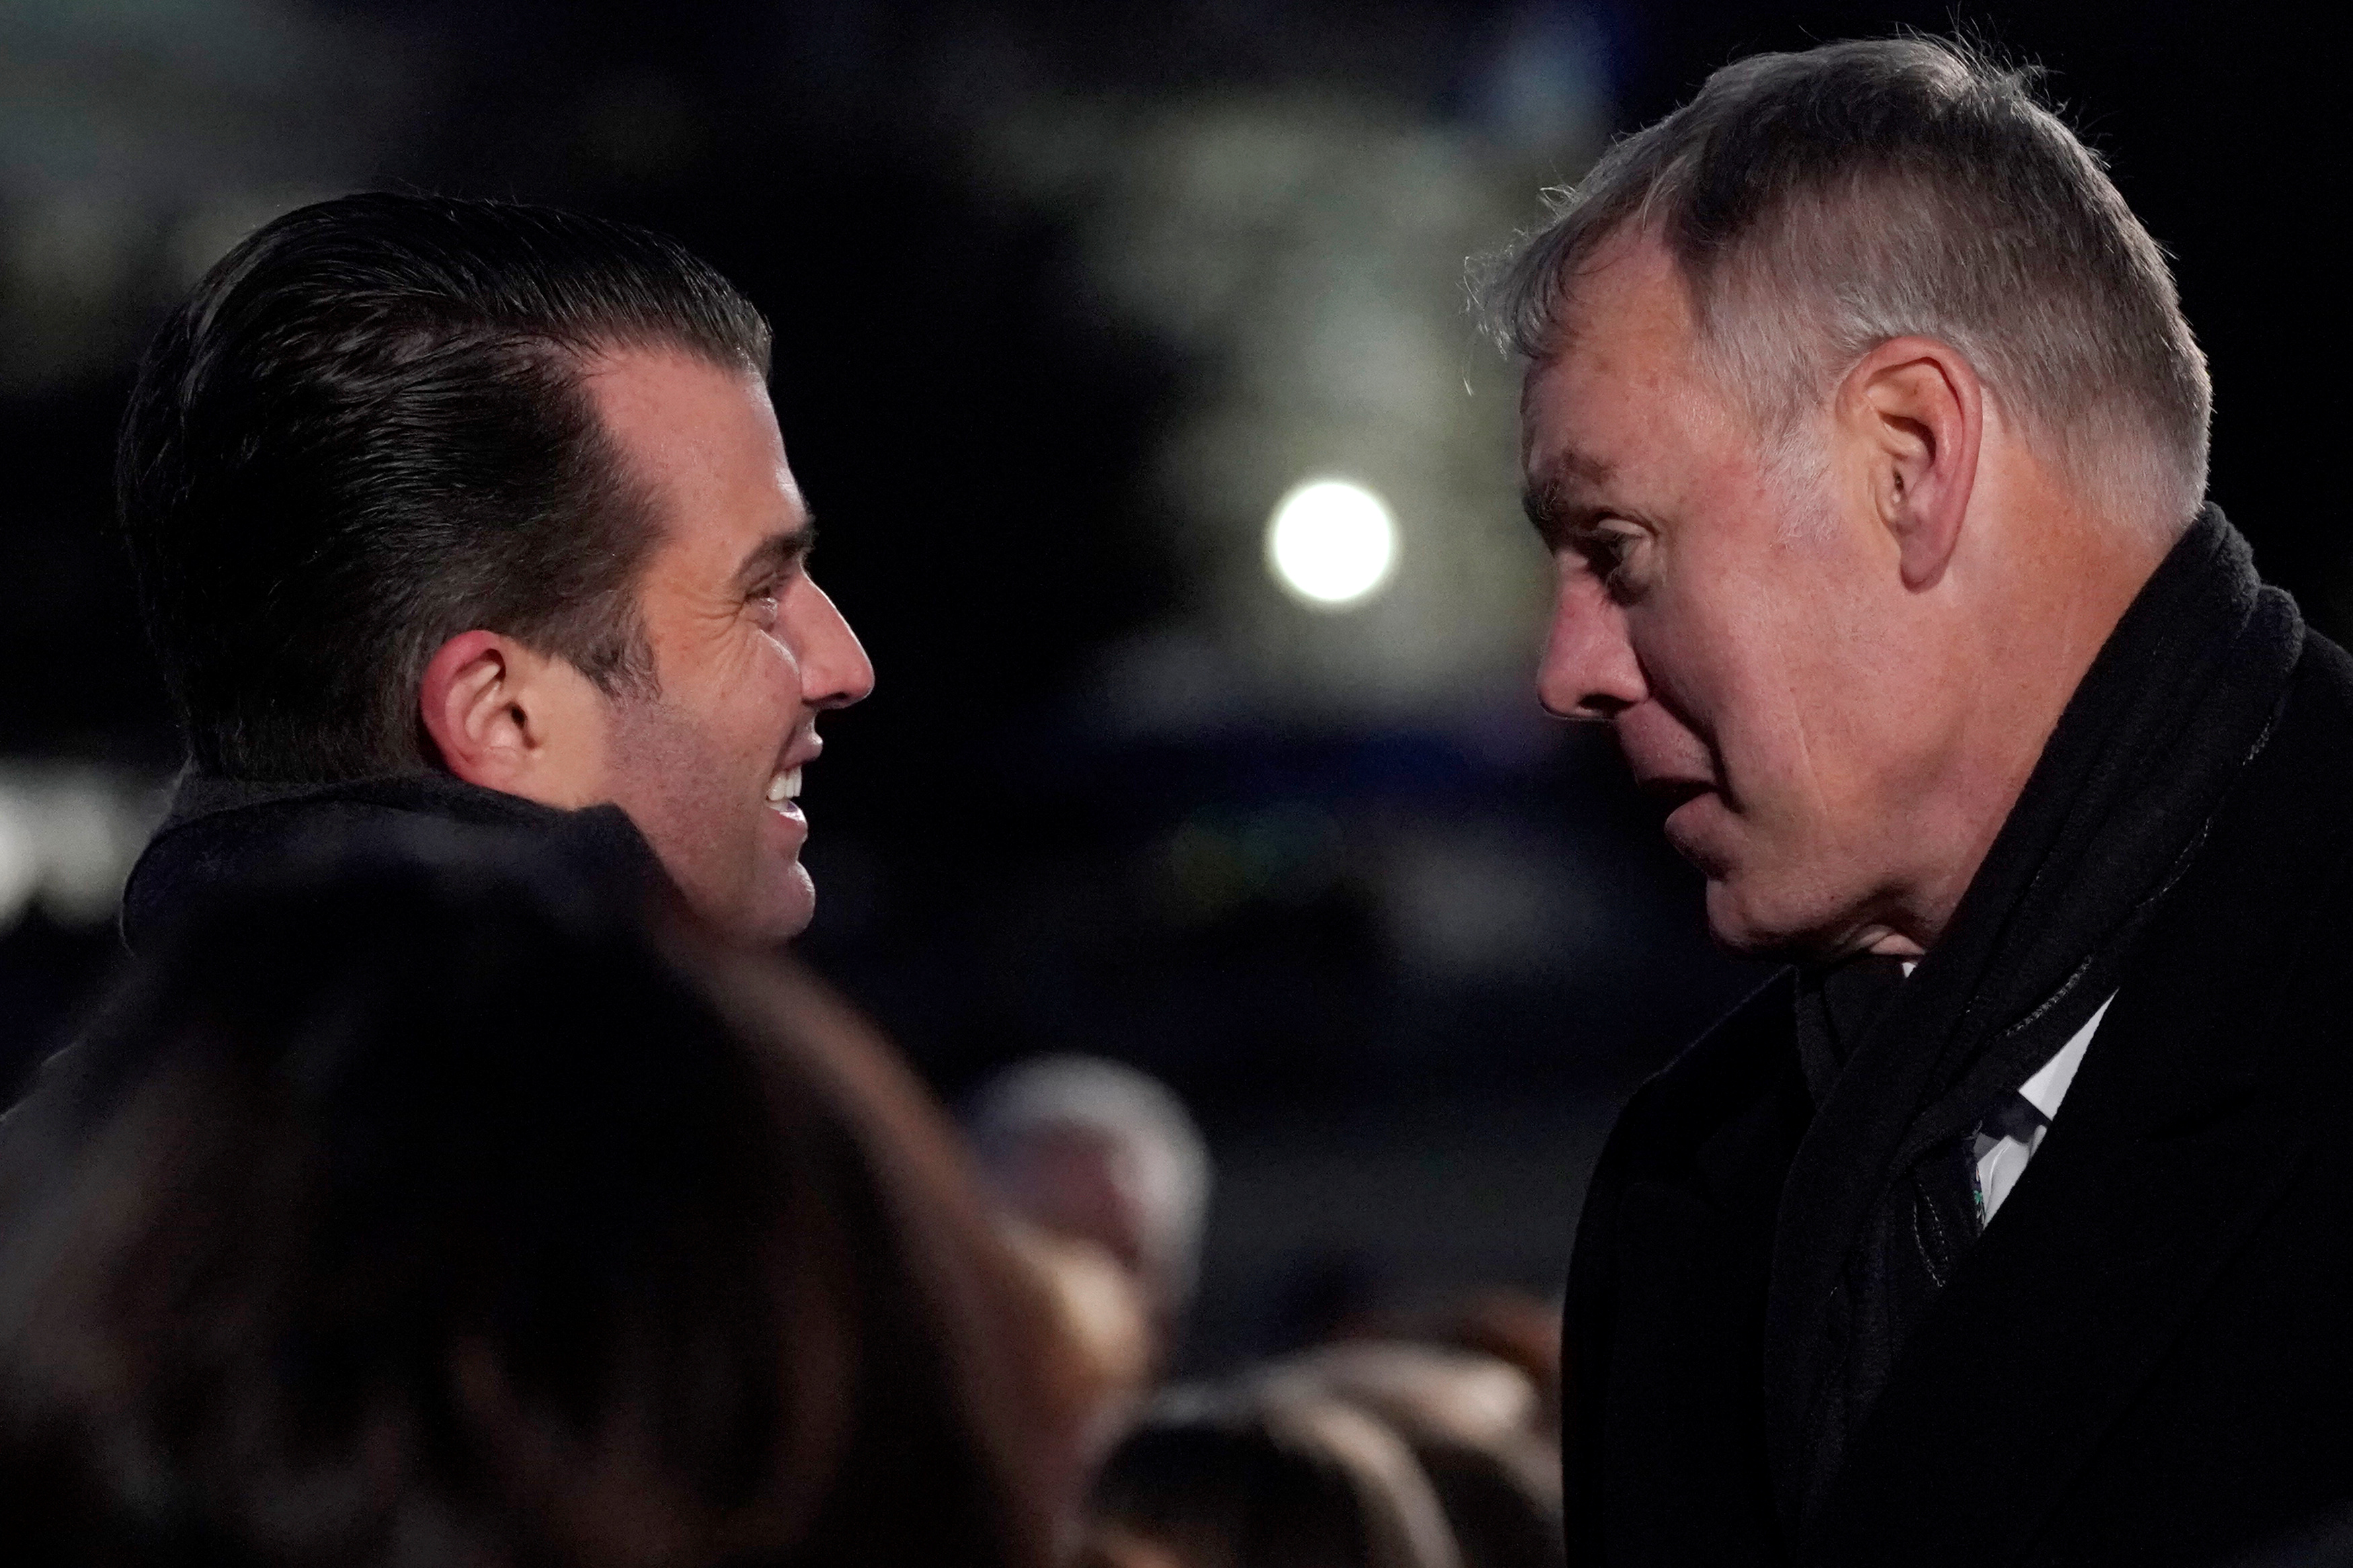 Trump Jr. speaks with U.S. Interior Secretary Zinke as they arrive for the 96th annual National Christmas Tree Lighting ceremony near the White House in Washington